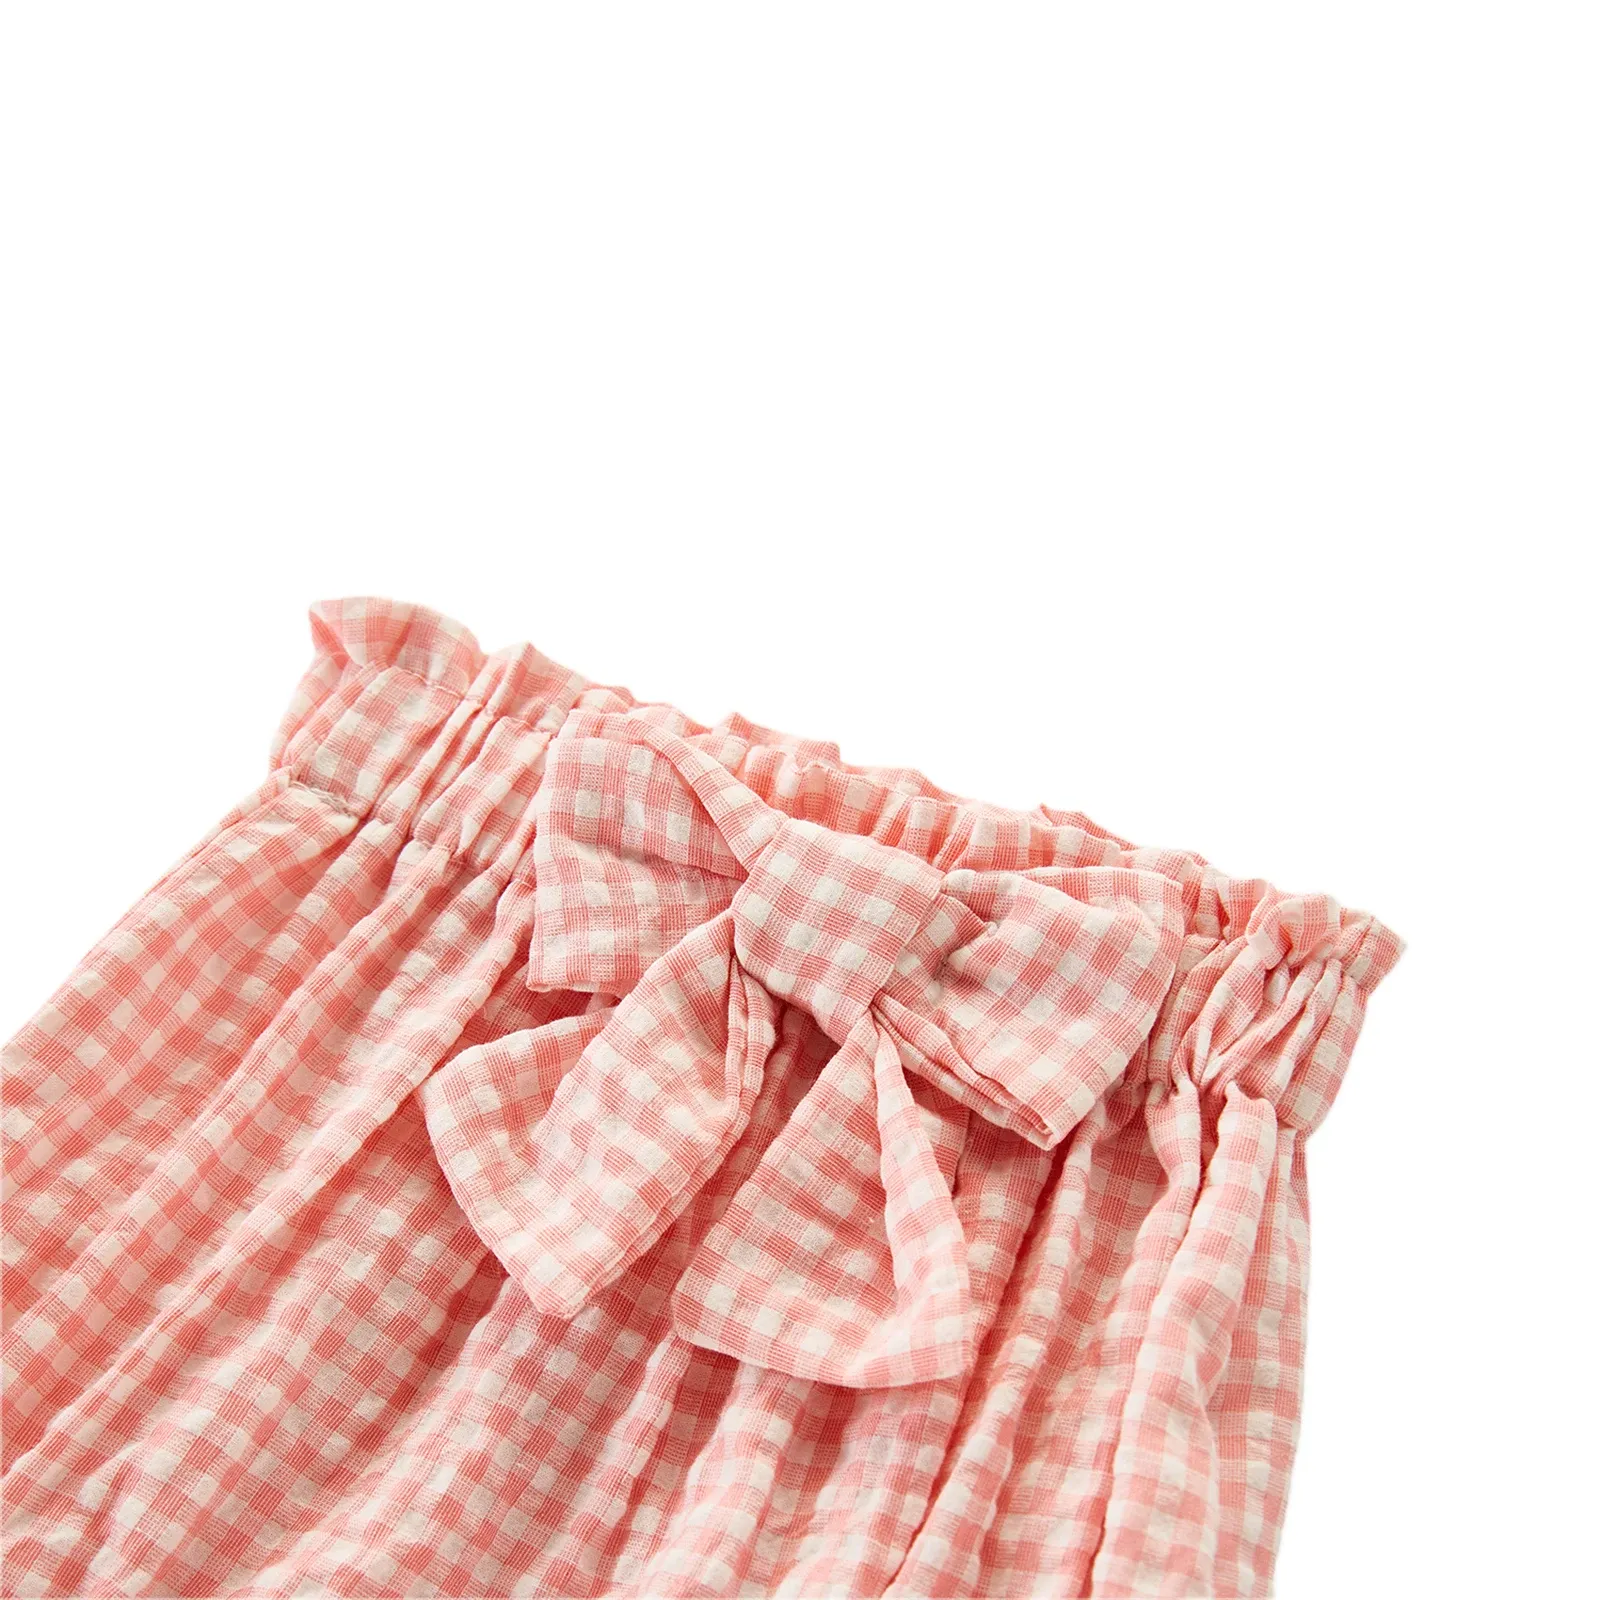 MABABY 3M-4Y INFANT TODDLER KID GIRLS Shorts Bow Plaid Ruffles Baby Blooders Summer Baby Bottoms Costumes D01